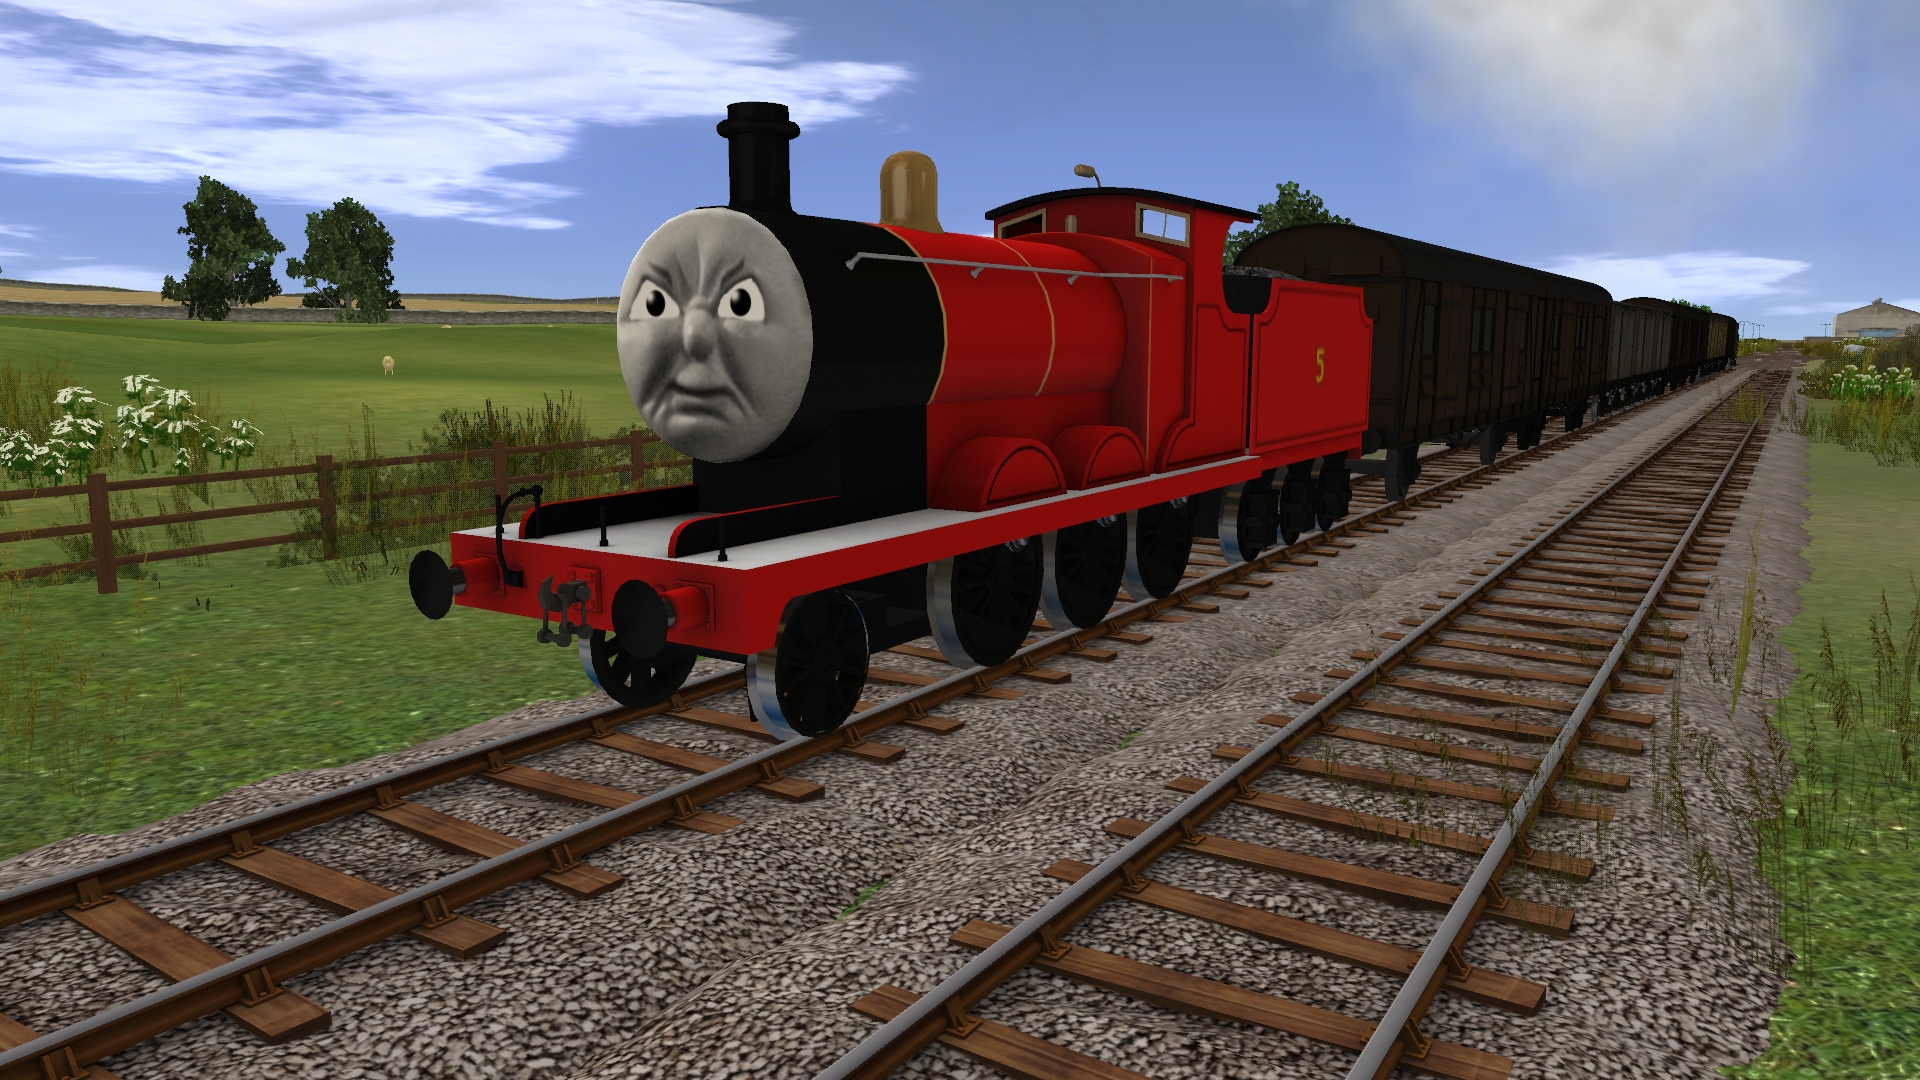 James and The Flying Kipper by Mk513 on DeviantArt